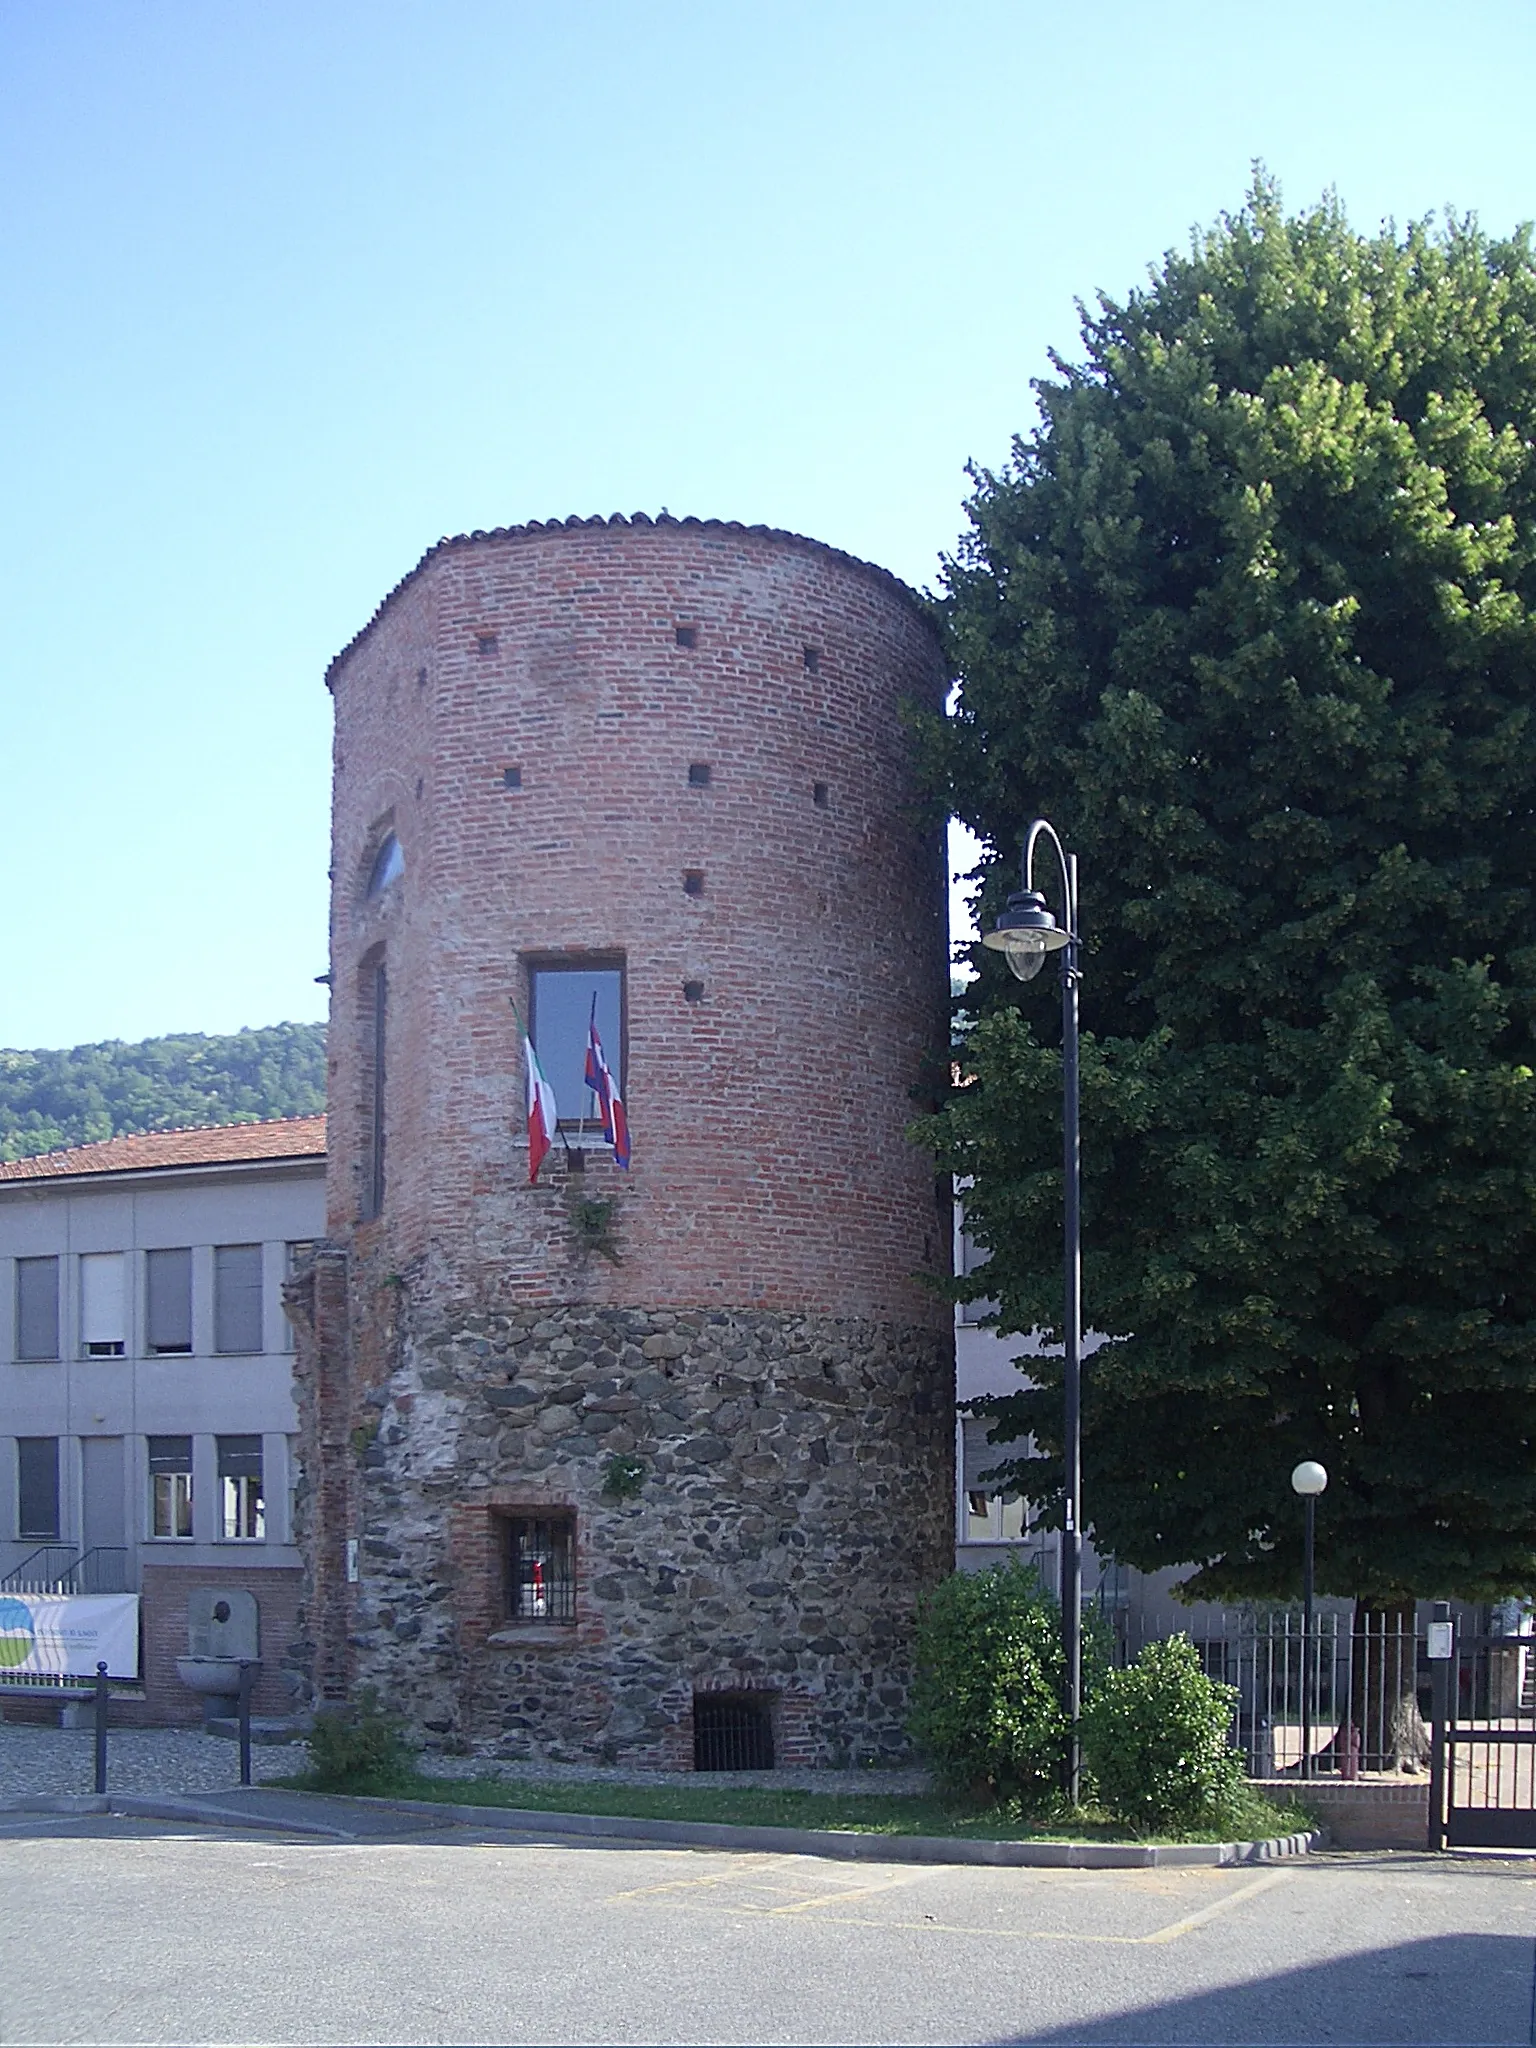 Photo showing: Nord-East Tower, part of the medieval fortification, XIII century, Piverone, Province of Turin, Italy